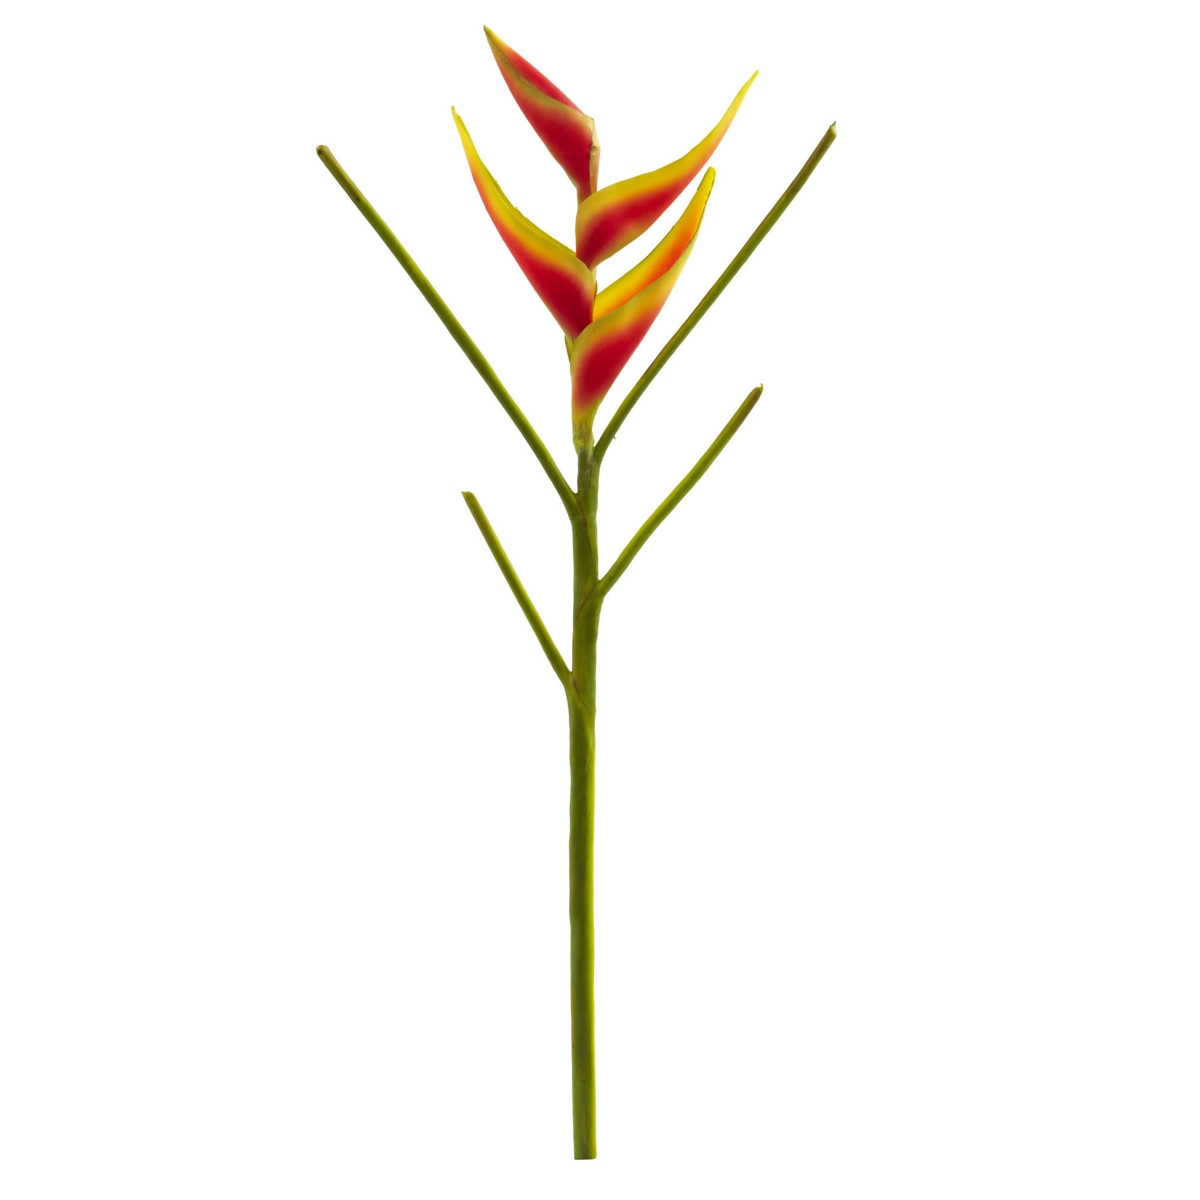 26-In. Heliconia Artificial Flower, Set of 4 - Orange